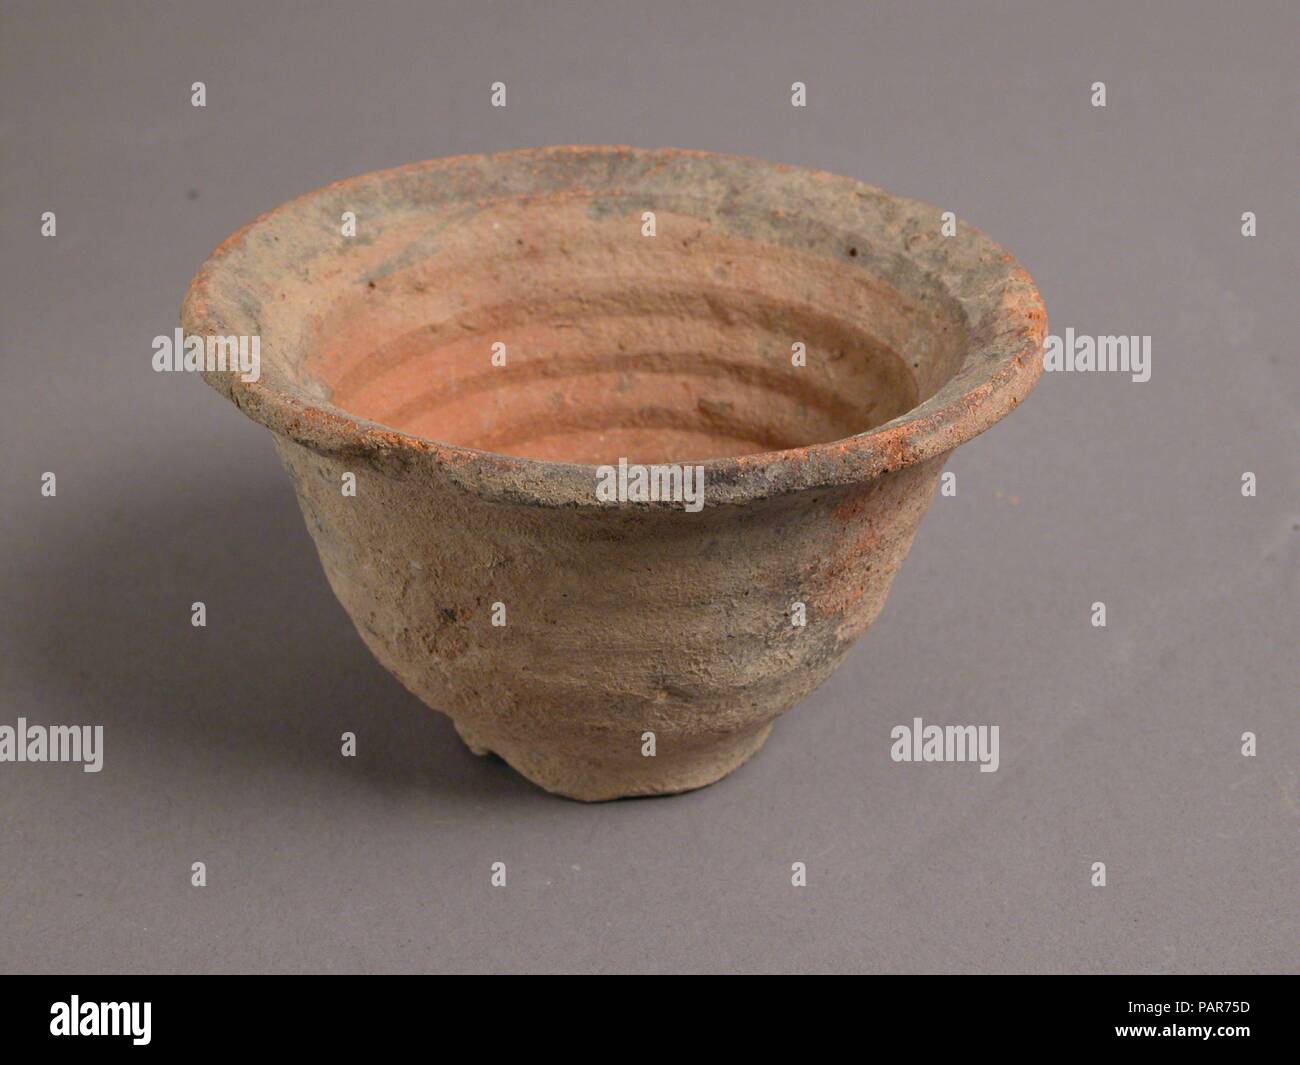 Bowl. Culture: Coptic. Dimensions: Overall: 2 x 3 7/16 in. (5.1 x 8.7 cm). Date: 4th-7th century. Museum: Metropolitan Museum of Art, New York, USA. Stock Photo